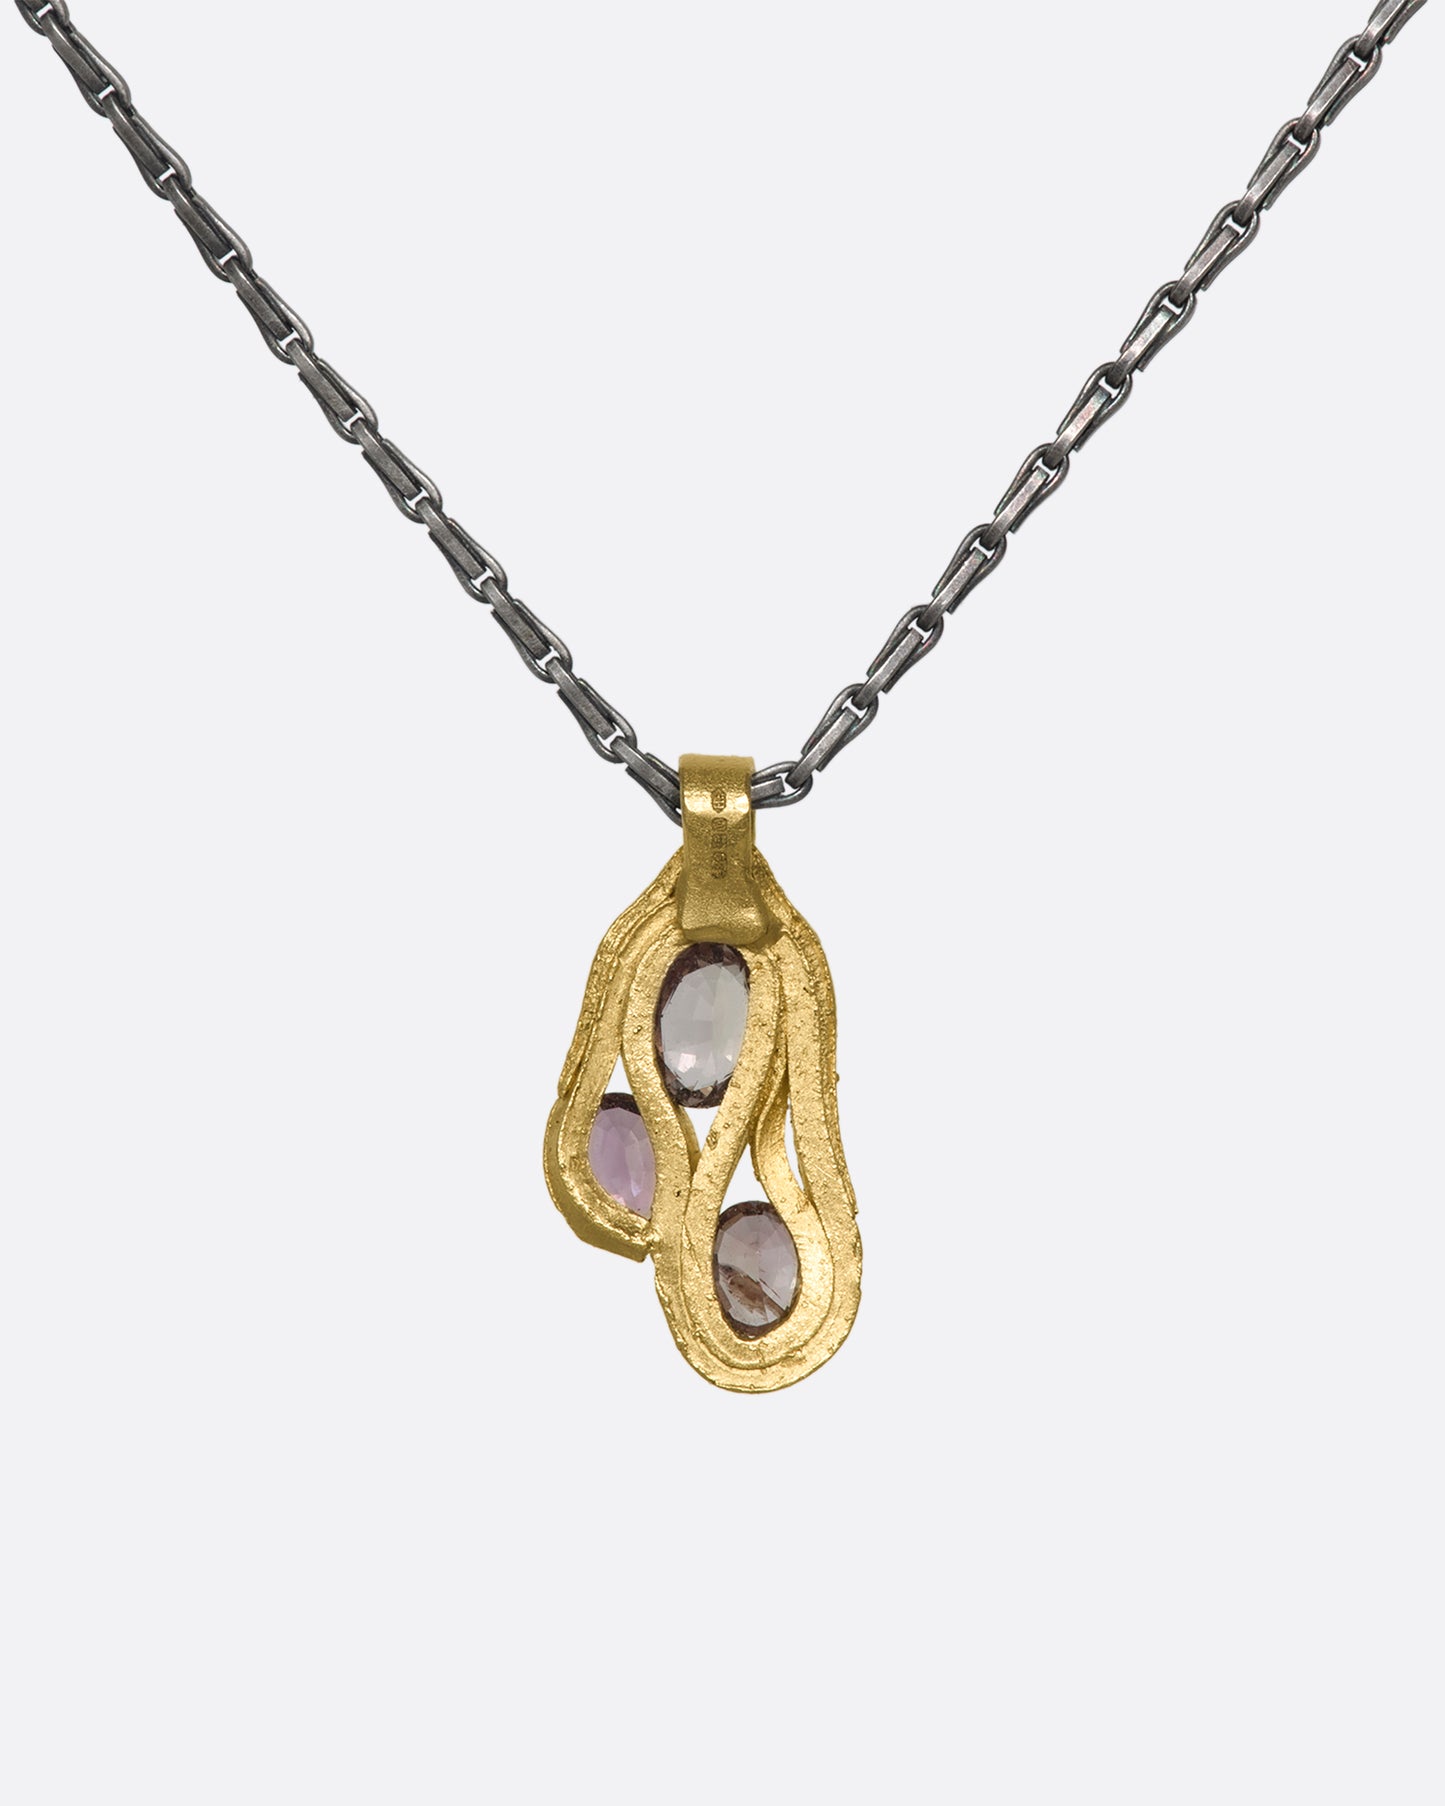 The bank of a hanging gold pendant with three pink sapphires on a darkened silver chain.